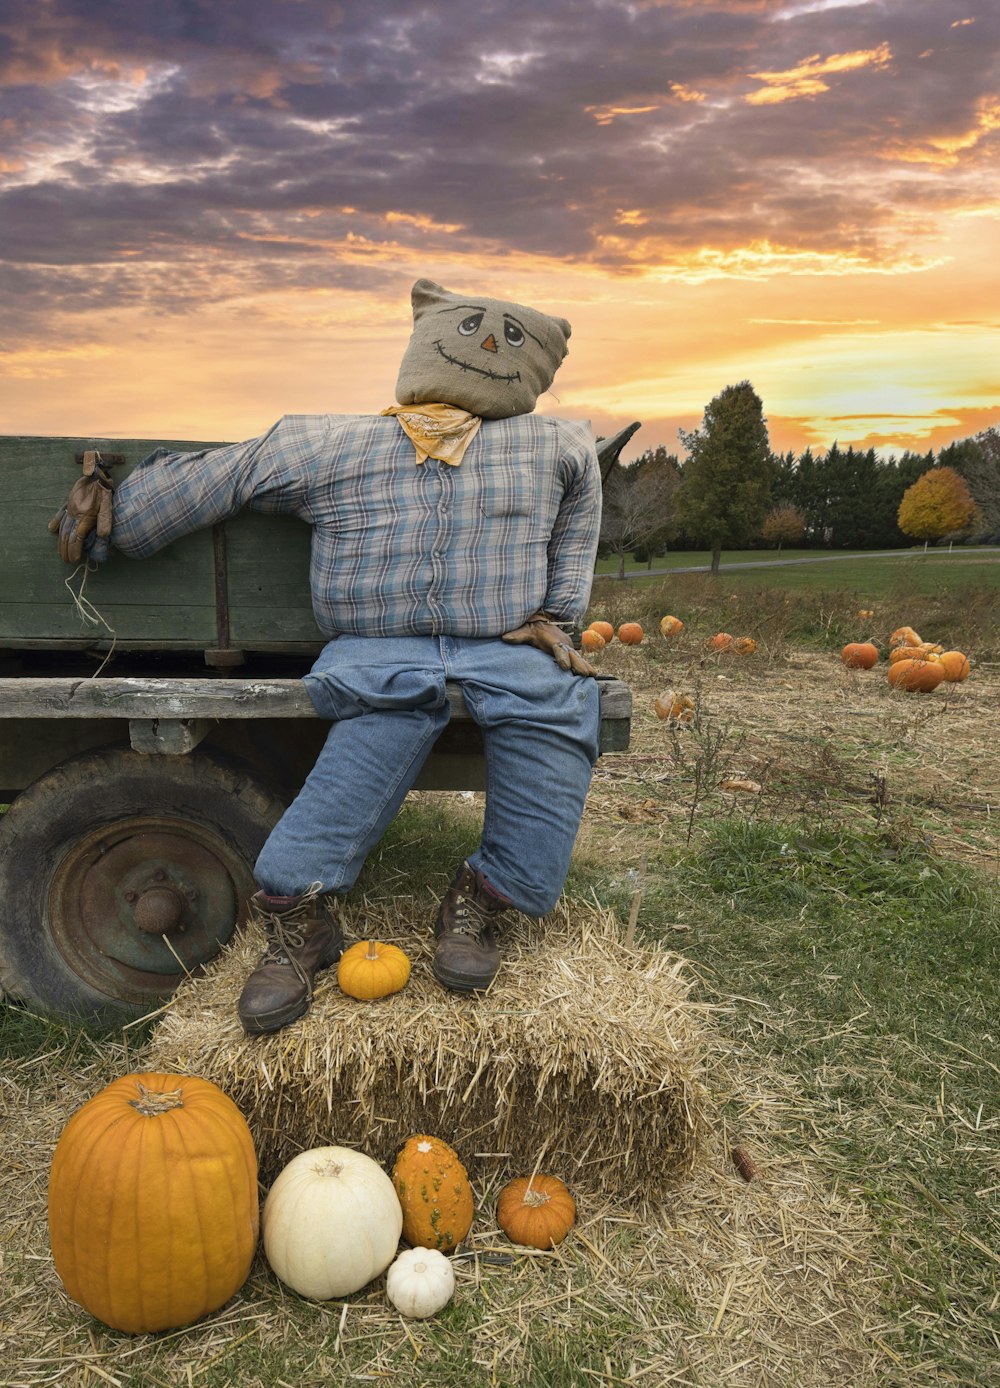 a person sitting on a tractor in a field with pumpkins